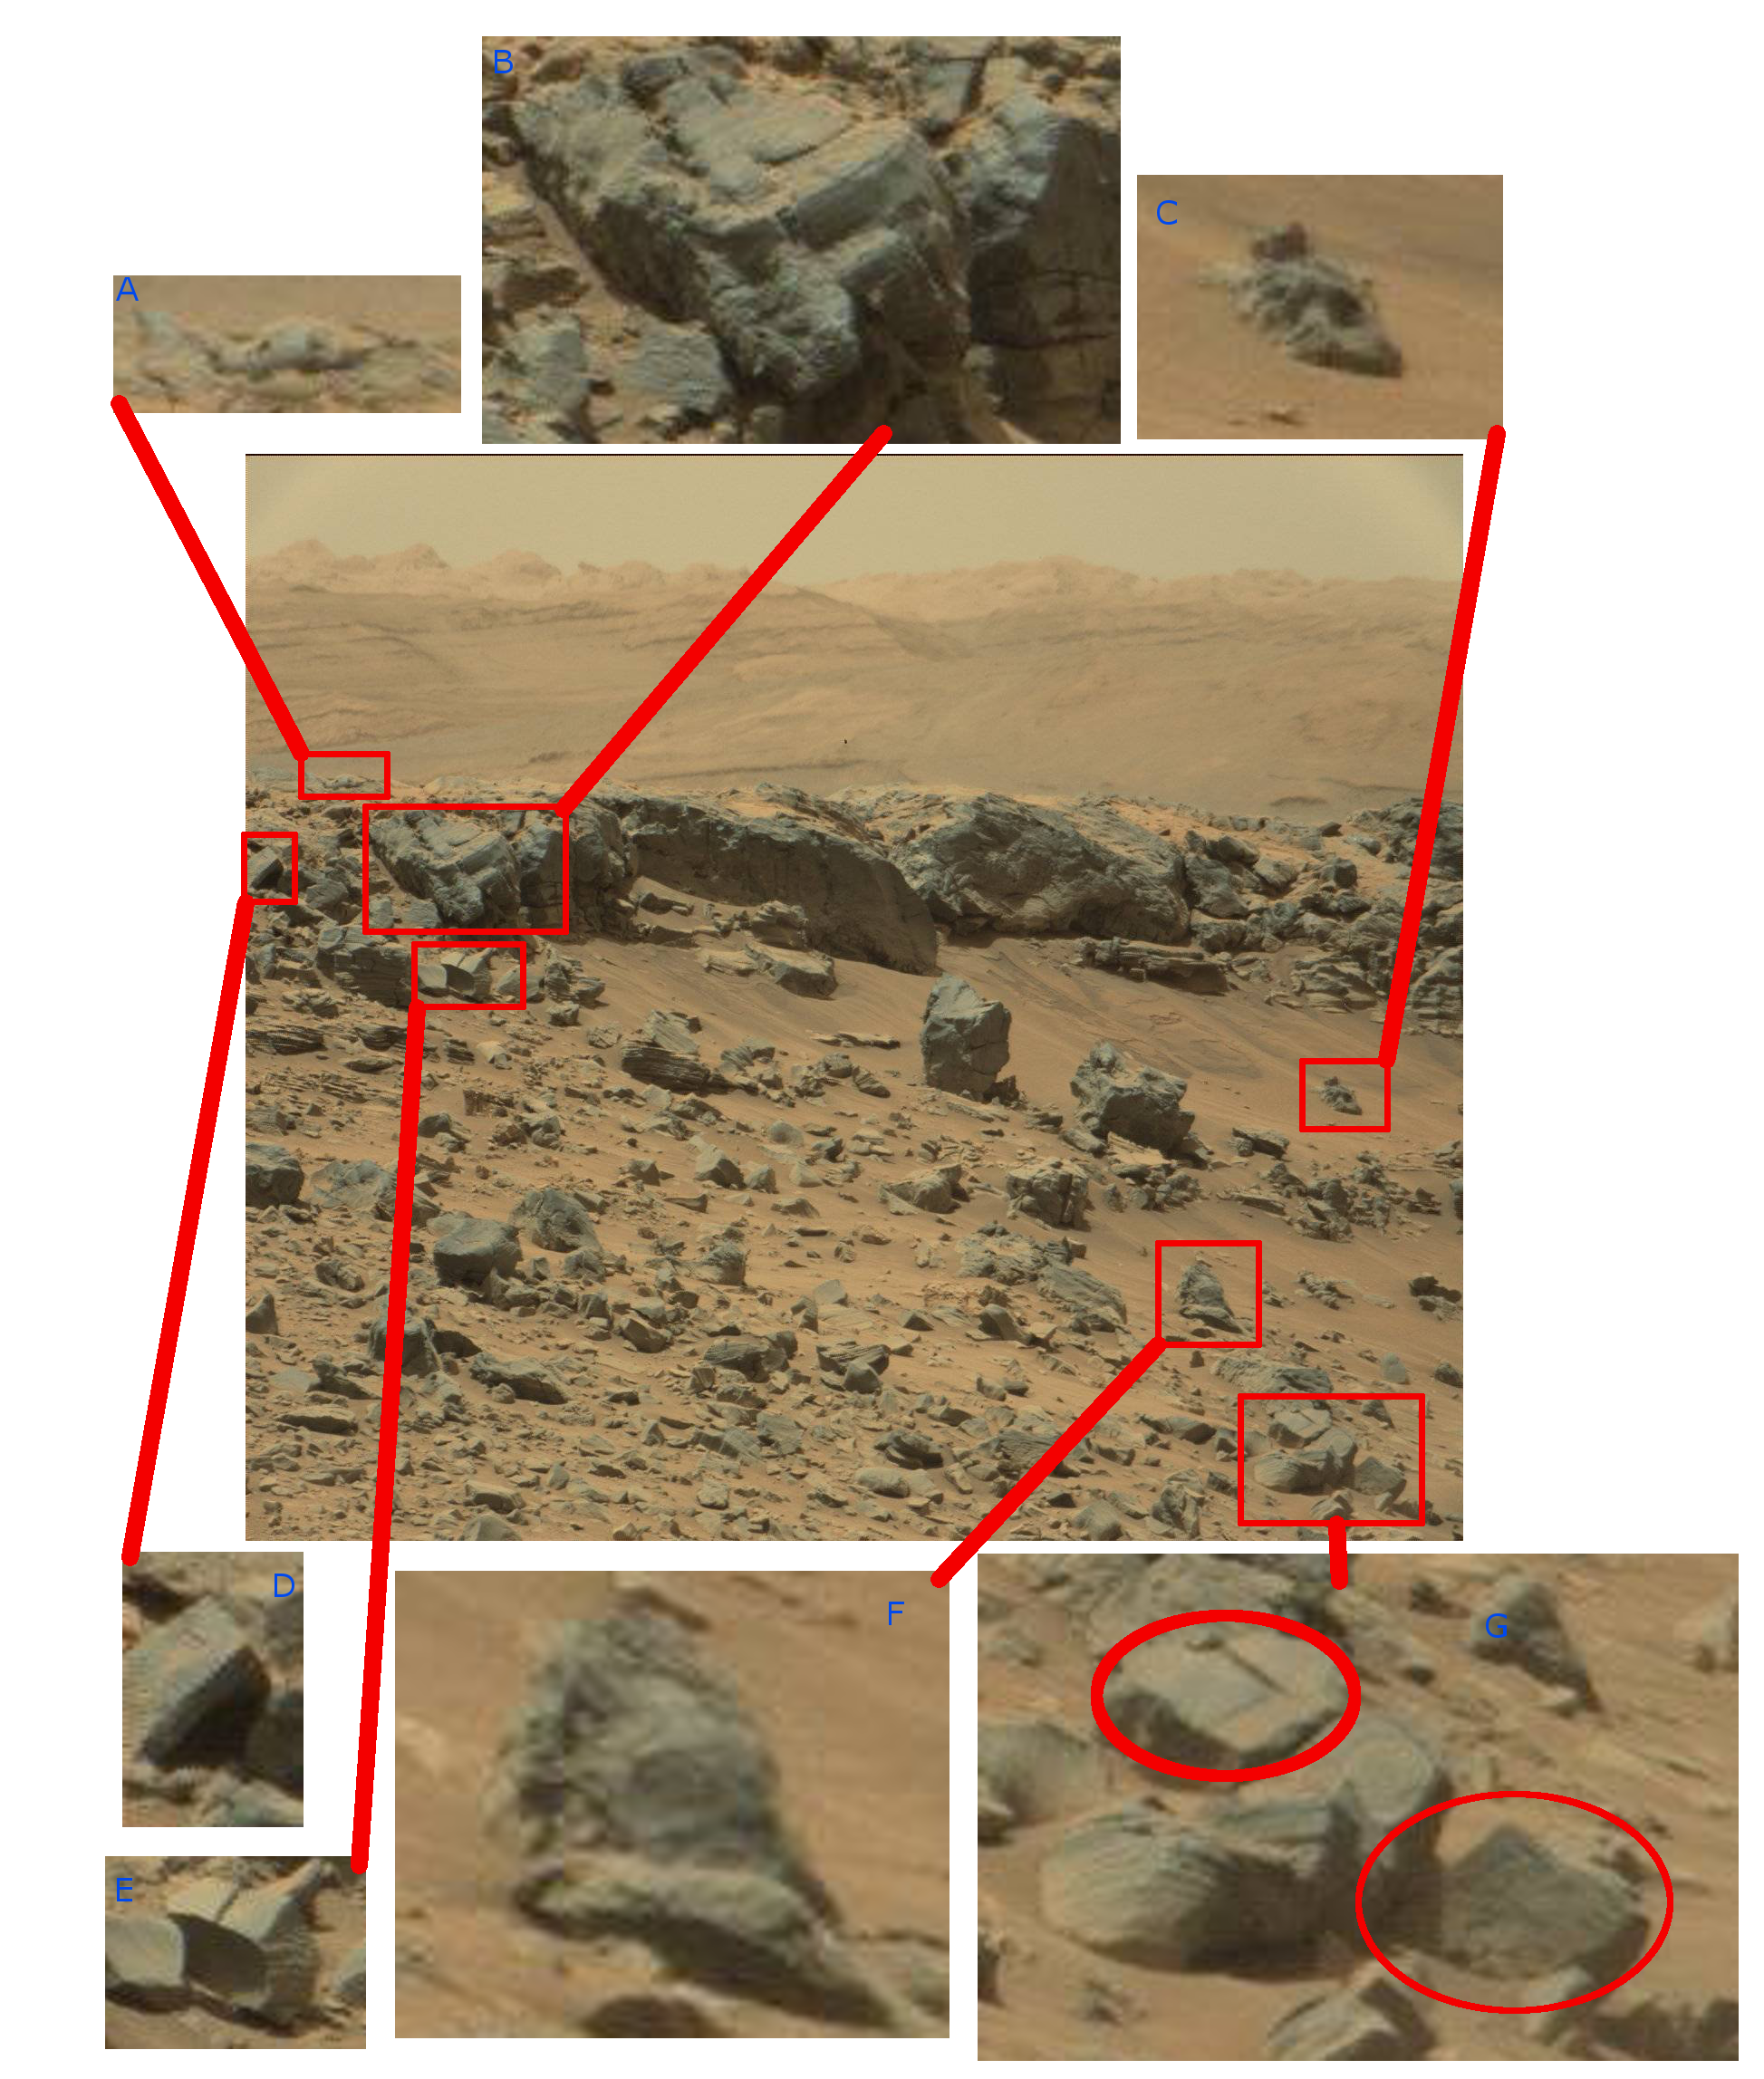 Sol-710-mars-rover-artifacts-harry-1